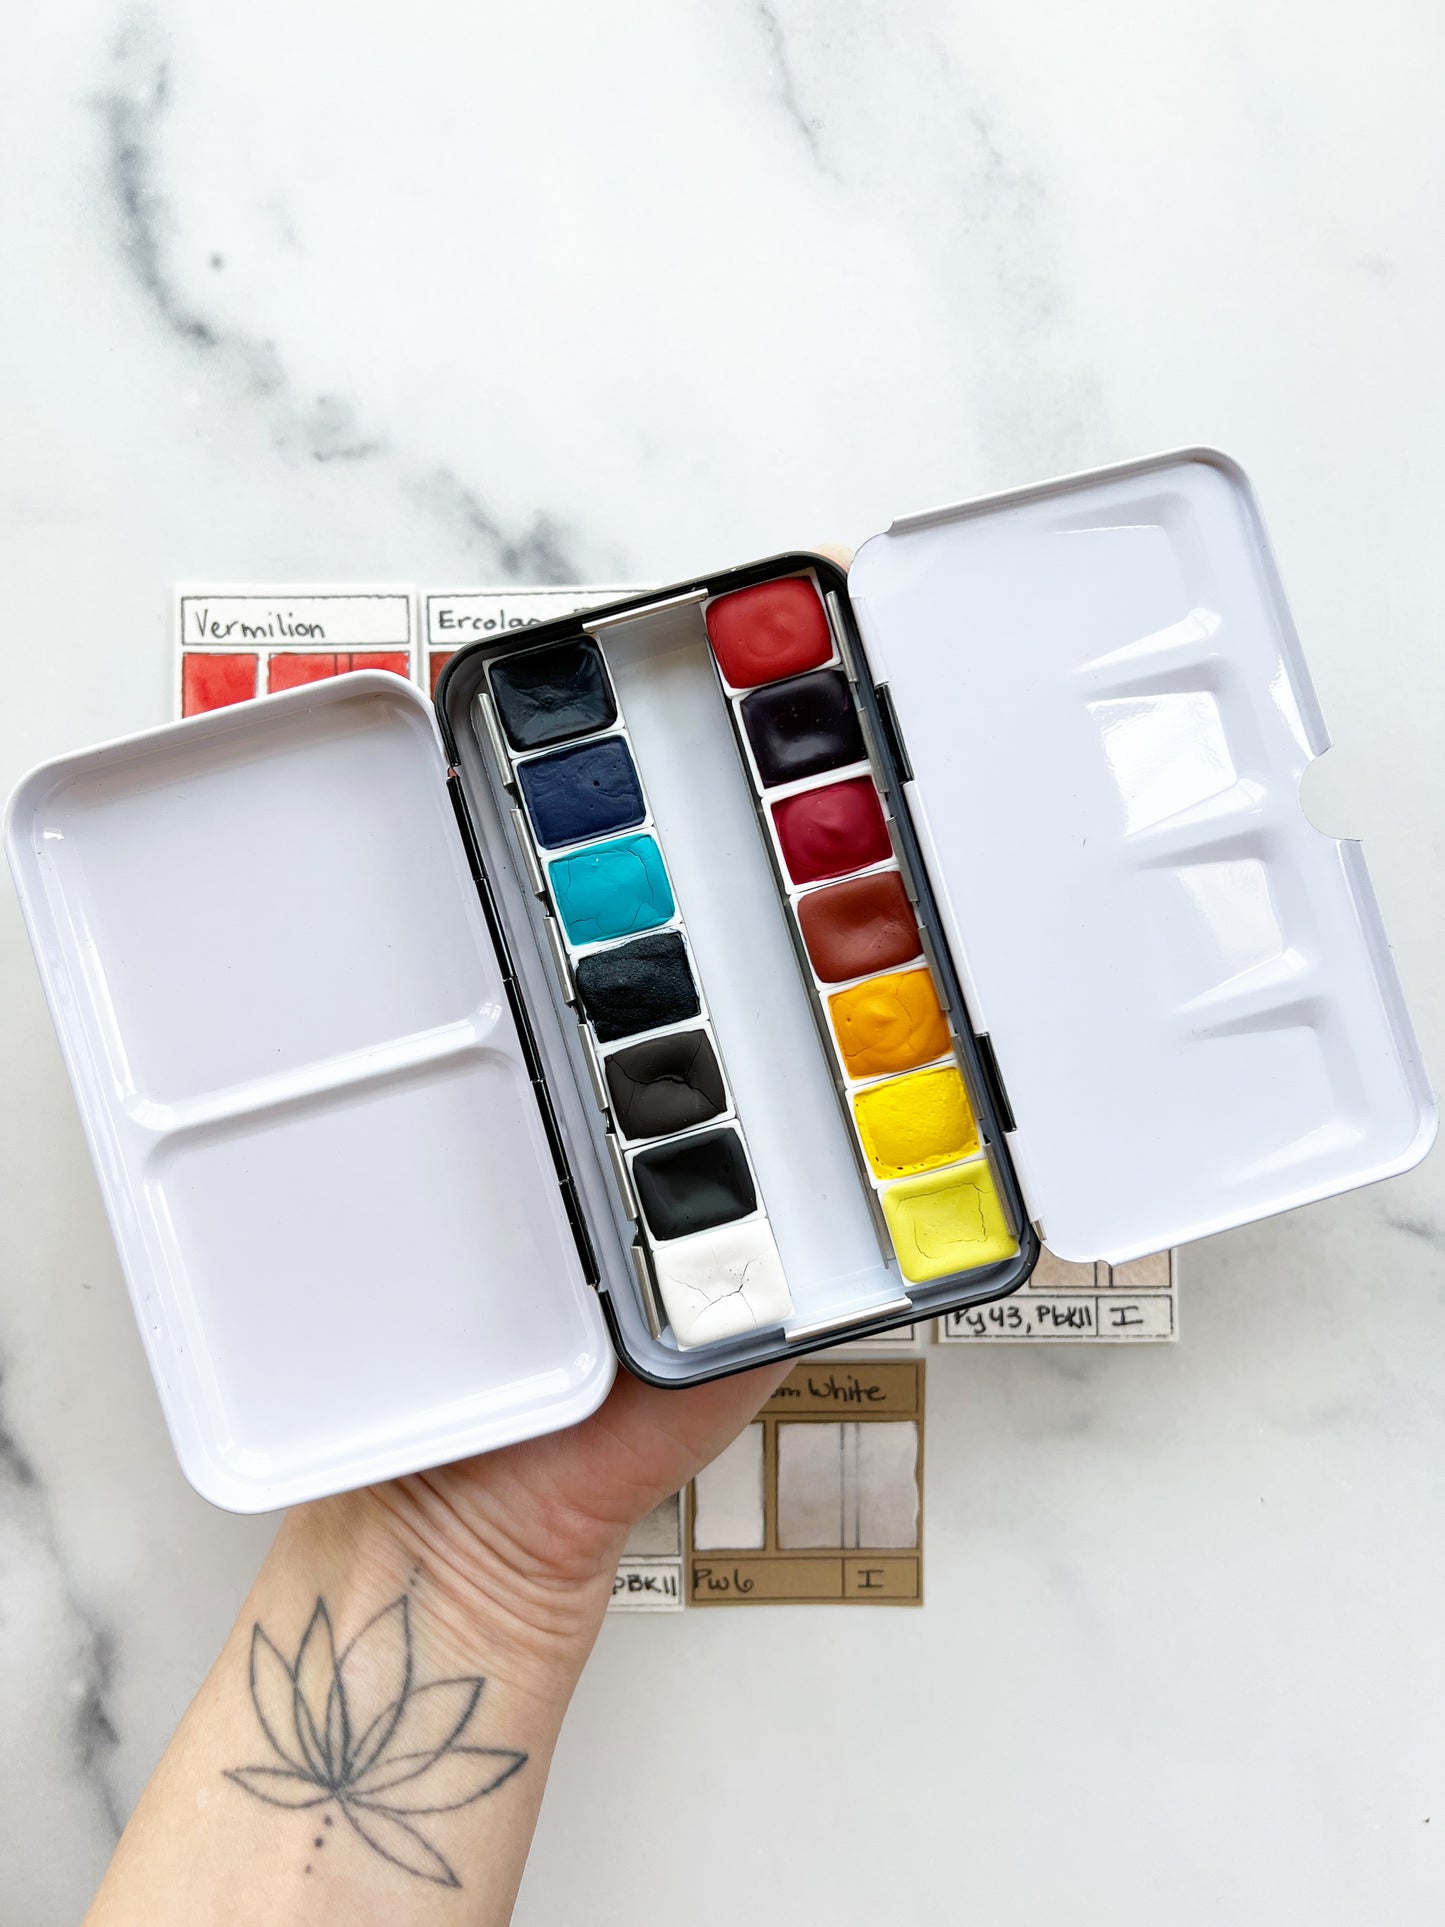 Primary 14 Paintbox, 14 half pans of watercolor paint in a black palette box